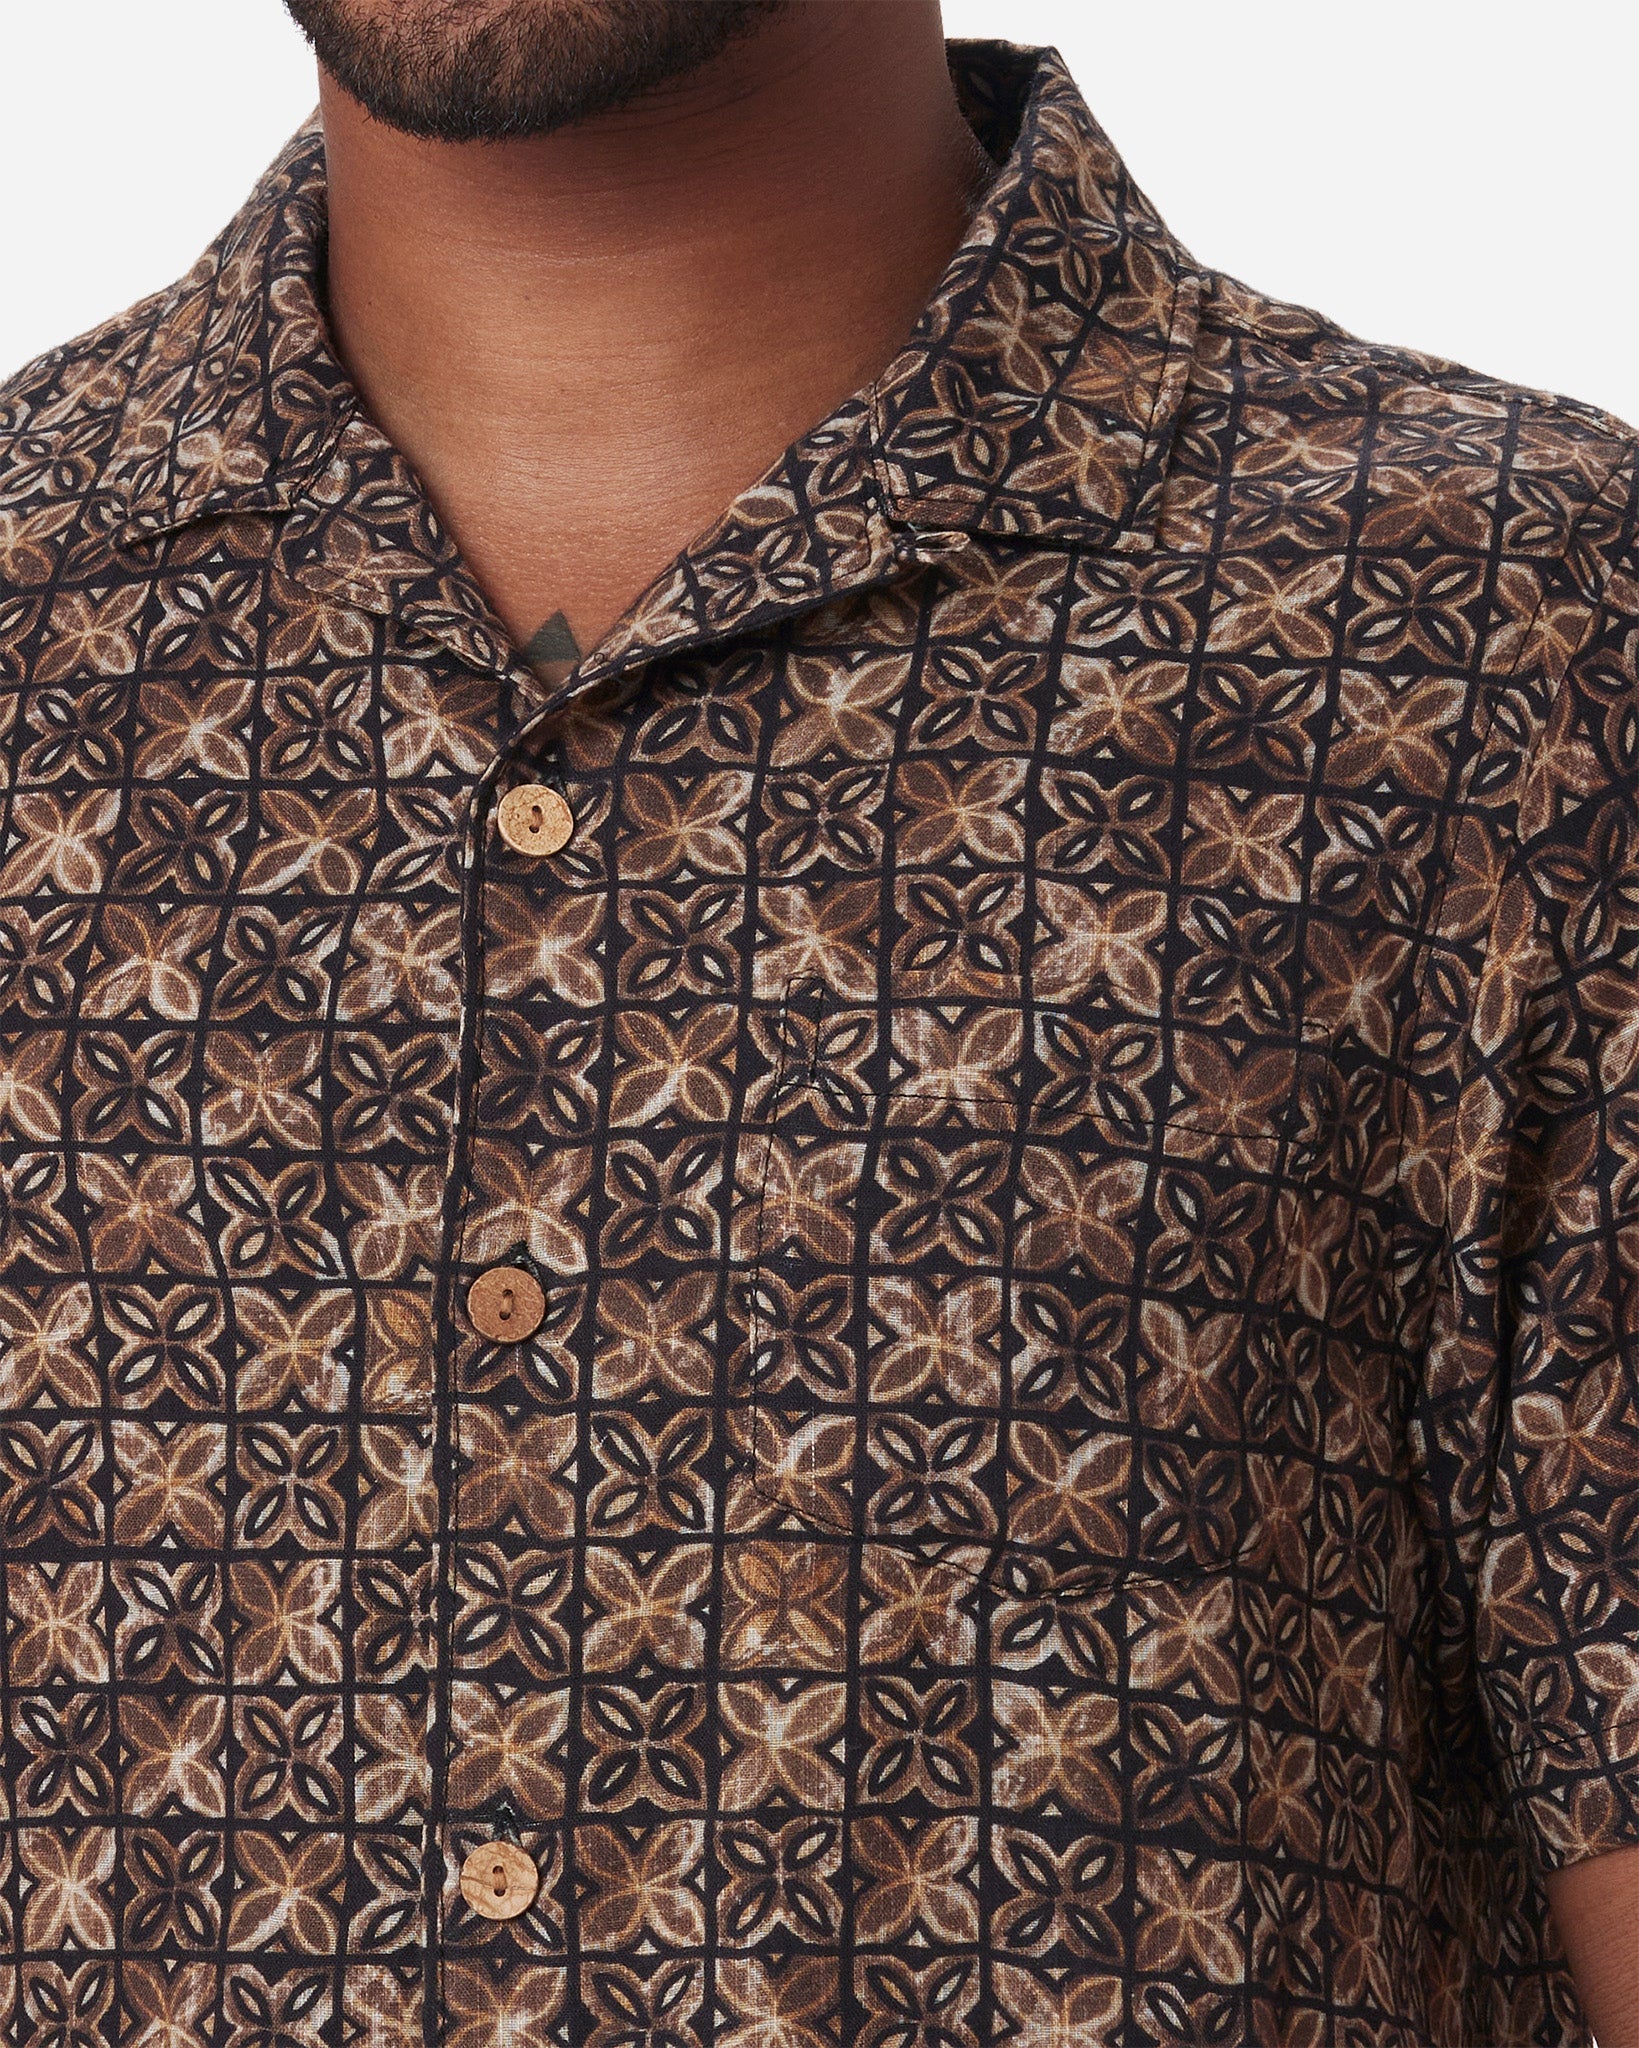 Zoomed-in neck, left-breast pocket, buttons, and collar on model wearing  Ace Rivington "Vintage Tile" gold, brown, and black exclusive design camp-collar shirt with coconut buttons and doubles-gauze soft-textured cotton fabric 